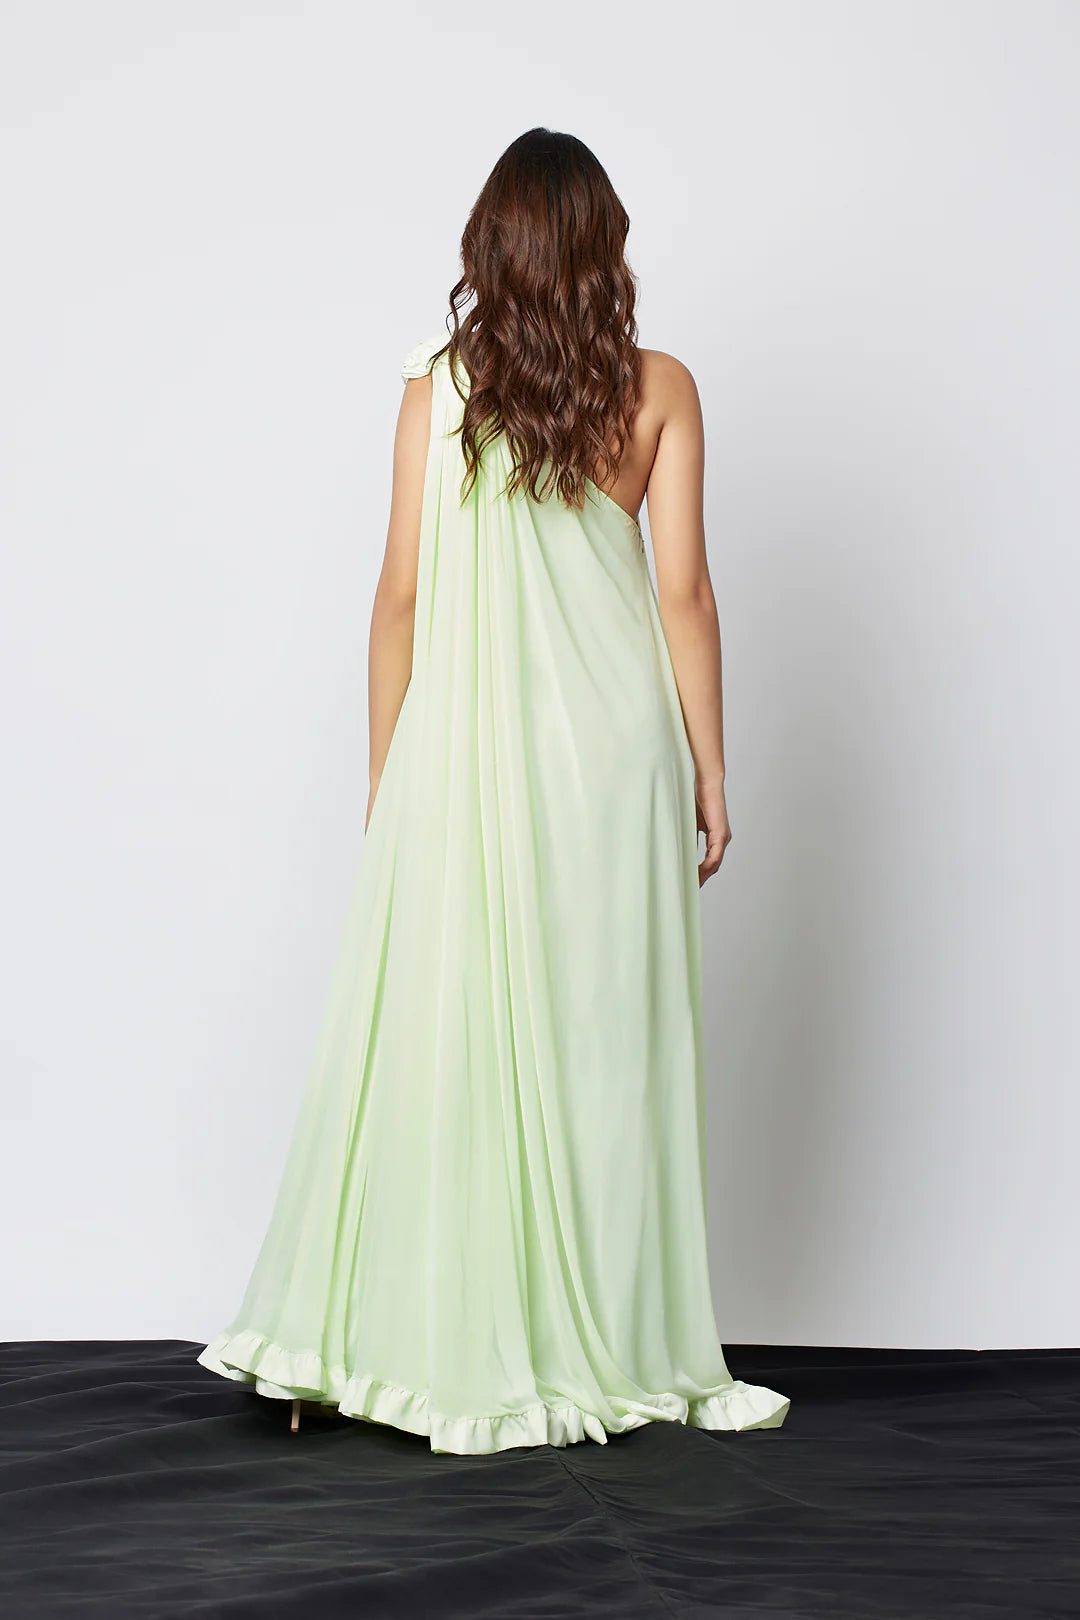 Image of Enhance your wardrobe with our Light Mint Green Georgette Blend One Shoulder Maxi Dress. Crafted from a georgette blend, this stunning maxi dress features one shoulder detail and an elegant design. Perfect for any occasion, this high-quality dress can be dressed up or down. . From savoirfashions.com